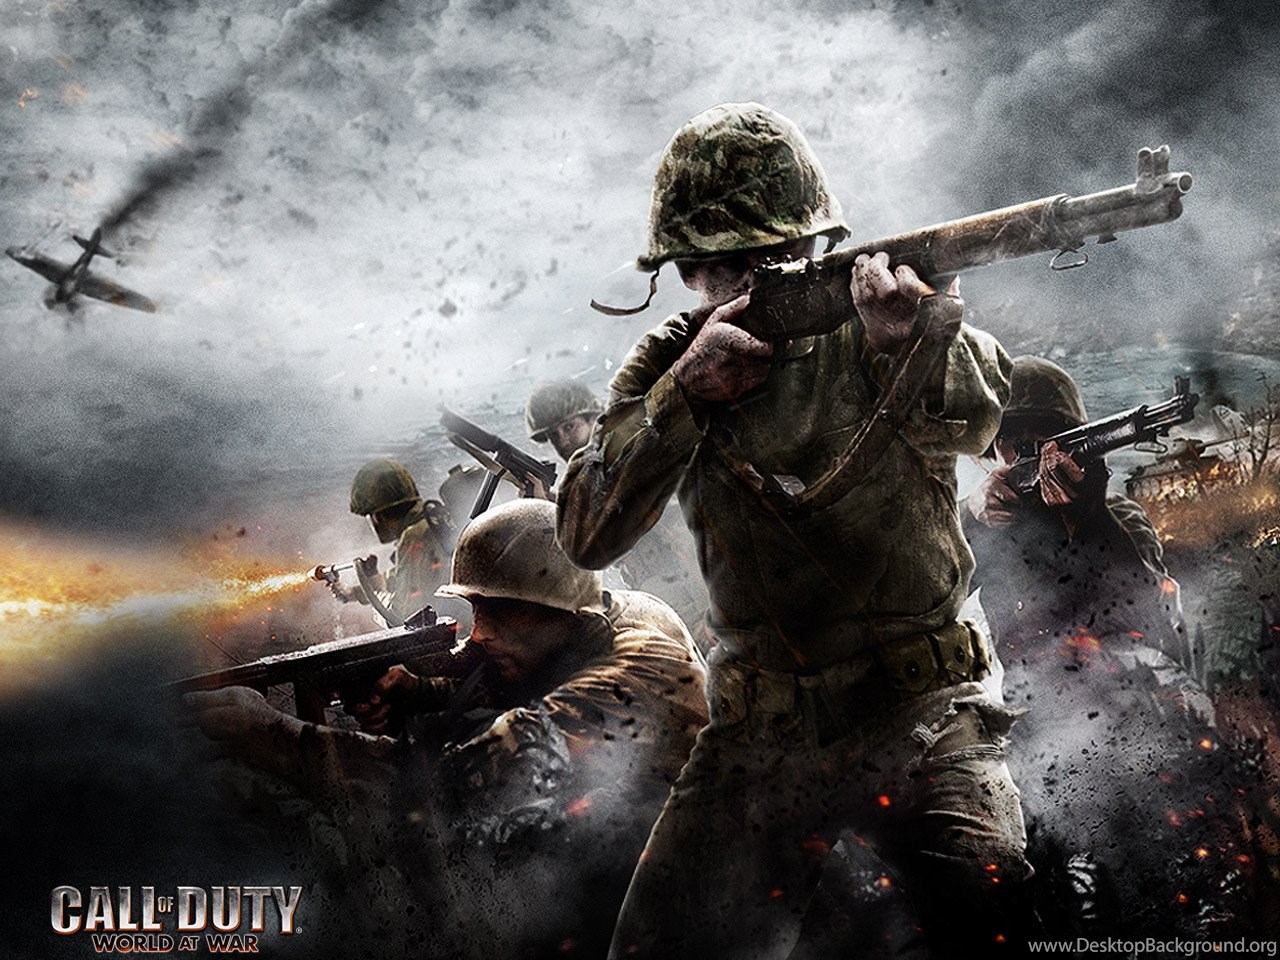 Awesome Call Of Duty World At War HD Wallpaper Free Download Desktop Background